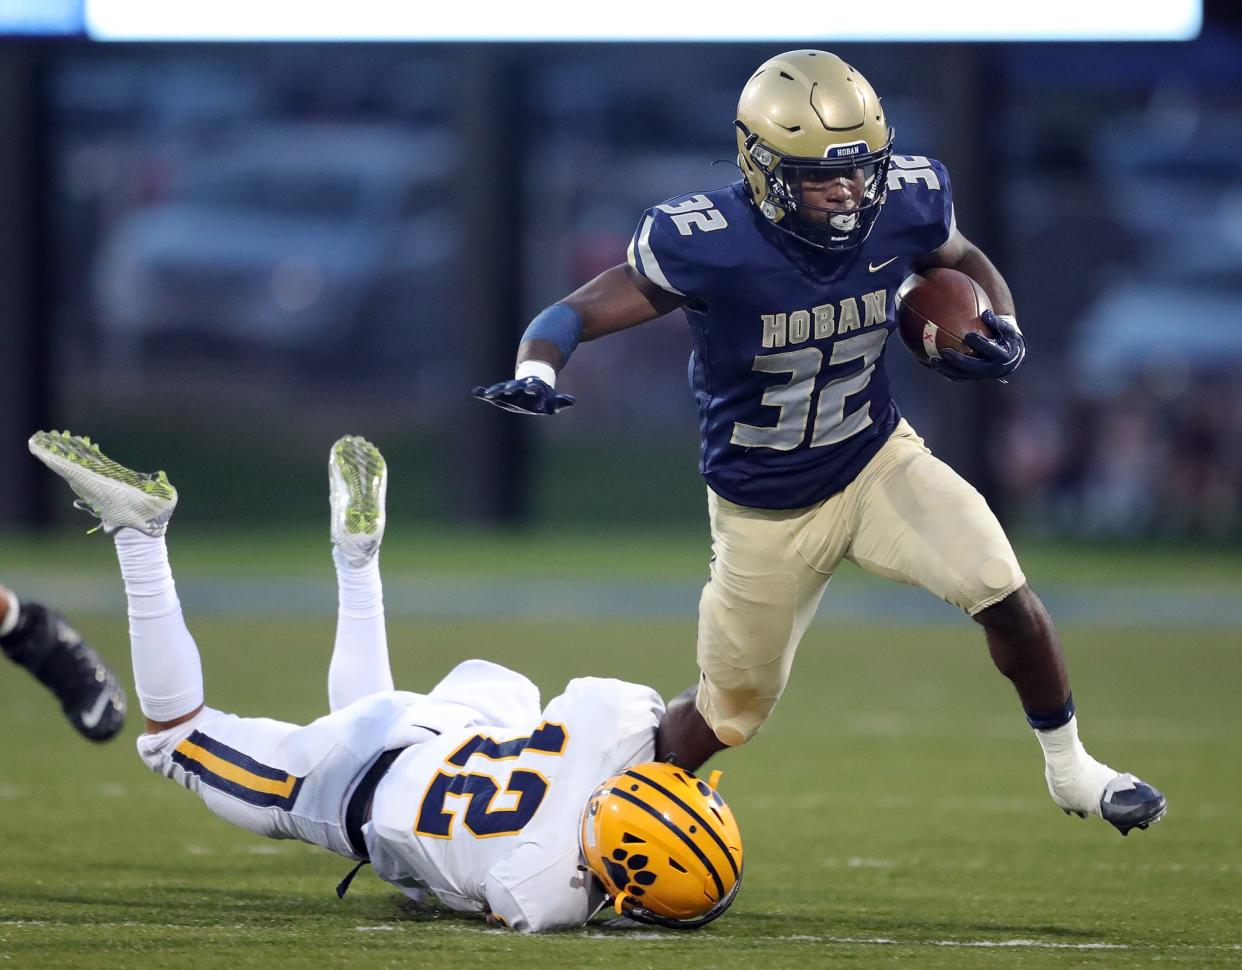 Hoban running back Lamar Sperling, top, escapes a tackle from St. Ignatius defensive back Cody Haddad during the first half of a high school football game, Friday, Sept. 16, 2022, in Akron, Ohio.